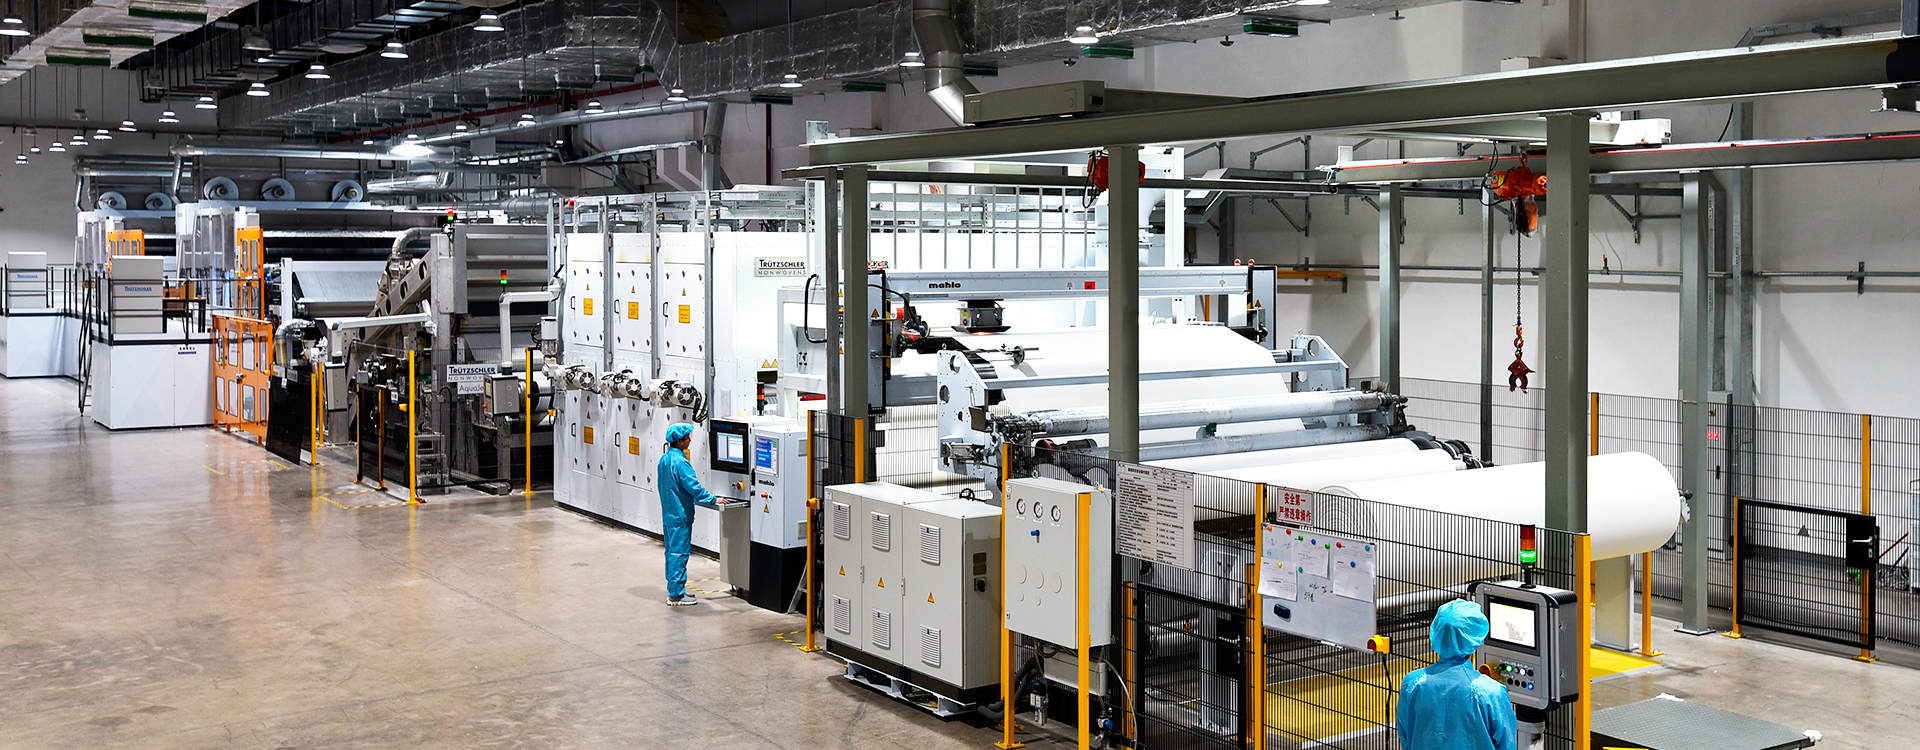 TRUETZSCHLER DIRECT LAYING PRODUCTION LINE, GERMANY